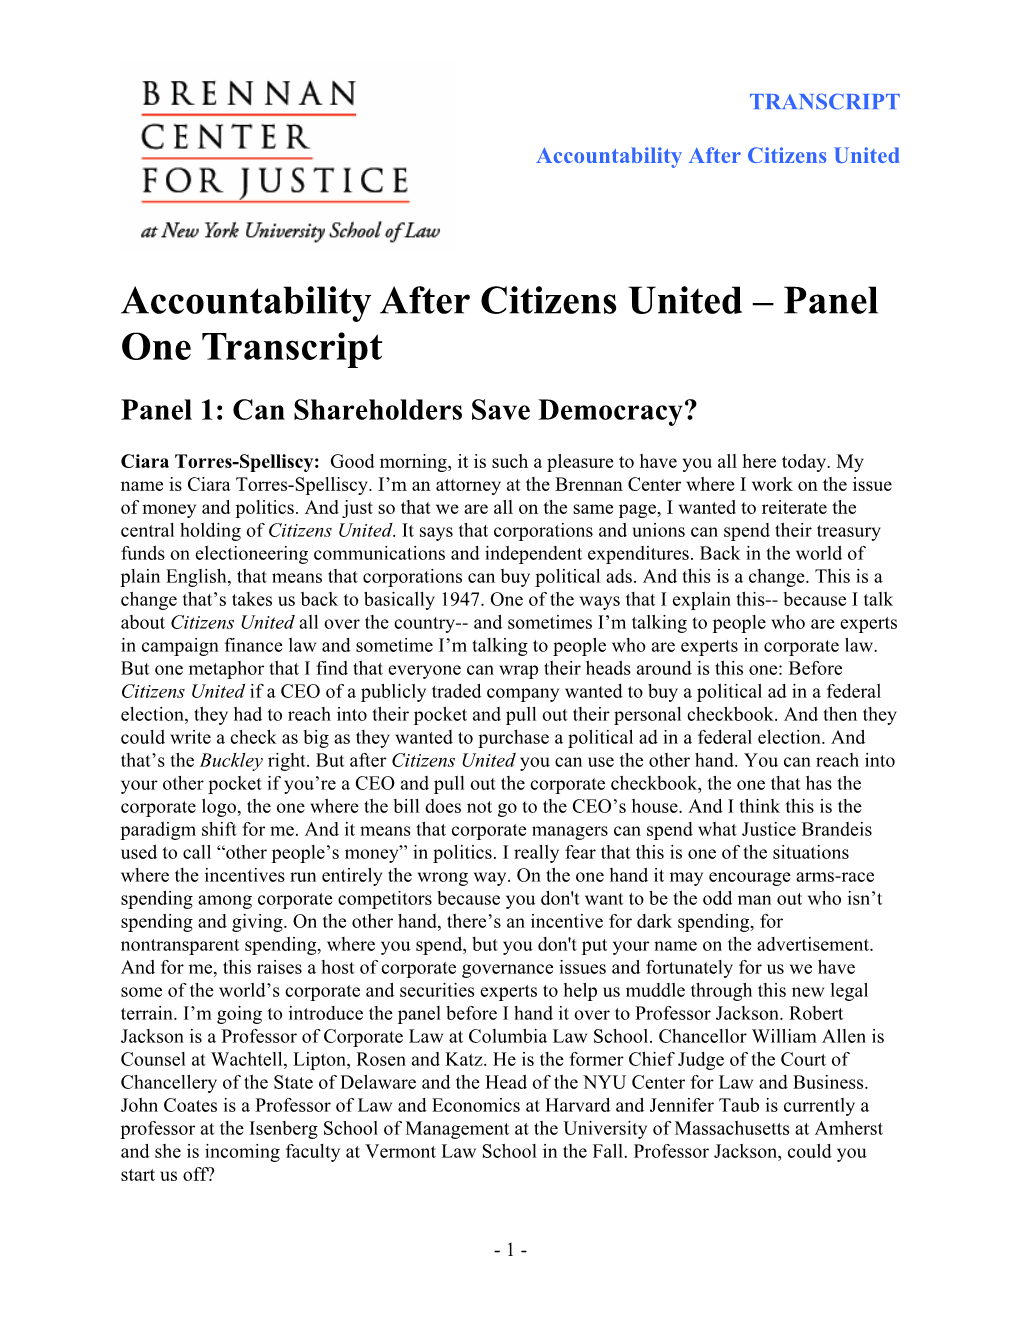 Accountability After Citizens United – Panel One Transcript Panel 1: Can Shareholders Save Democracy?